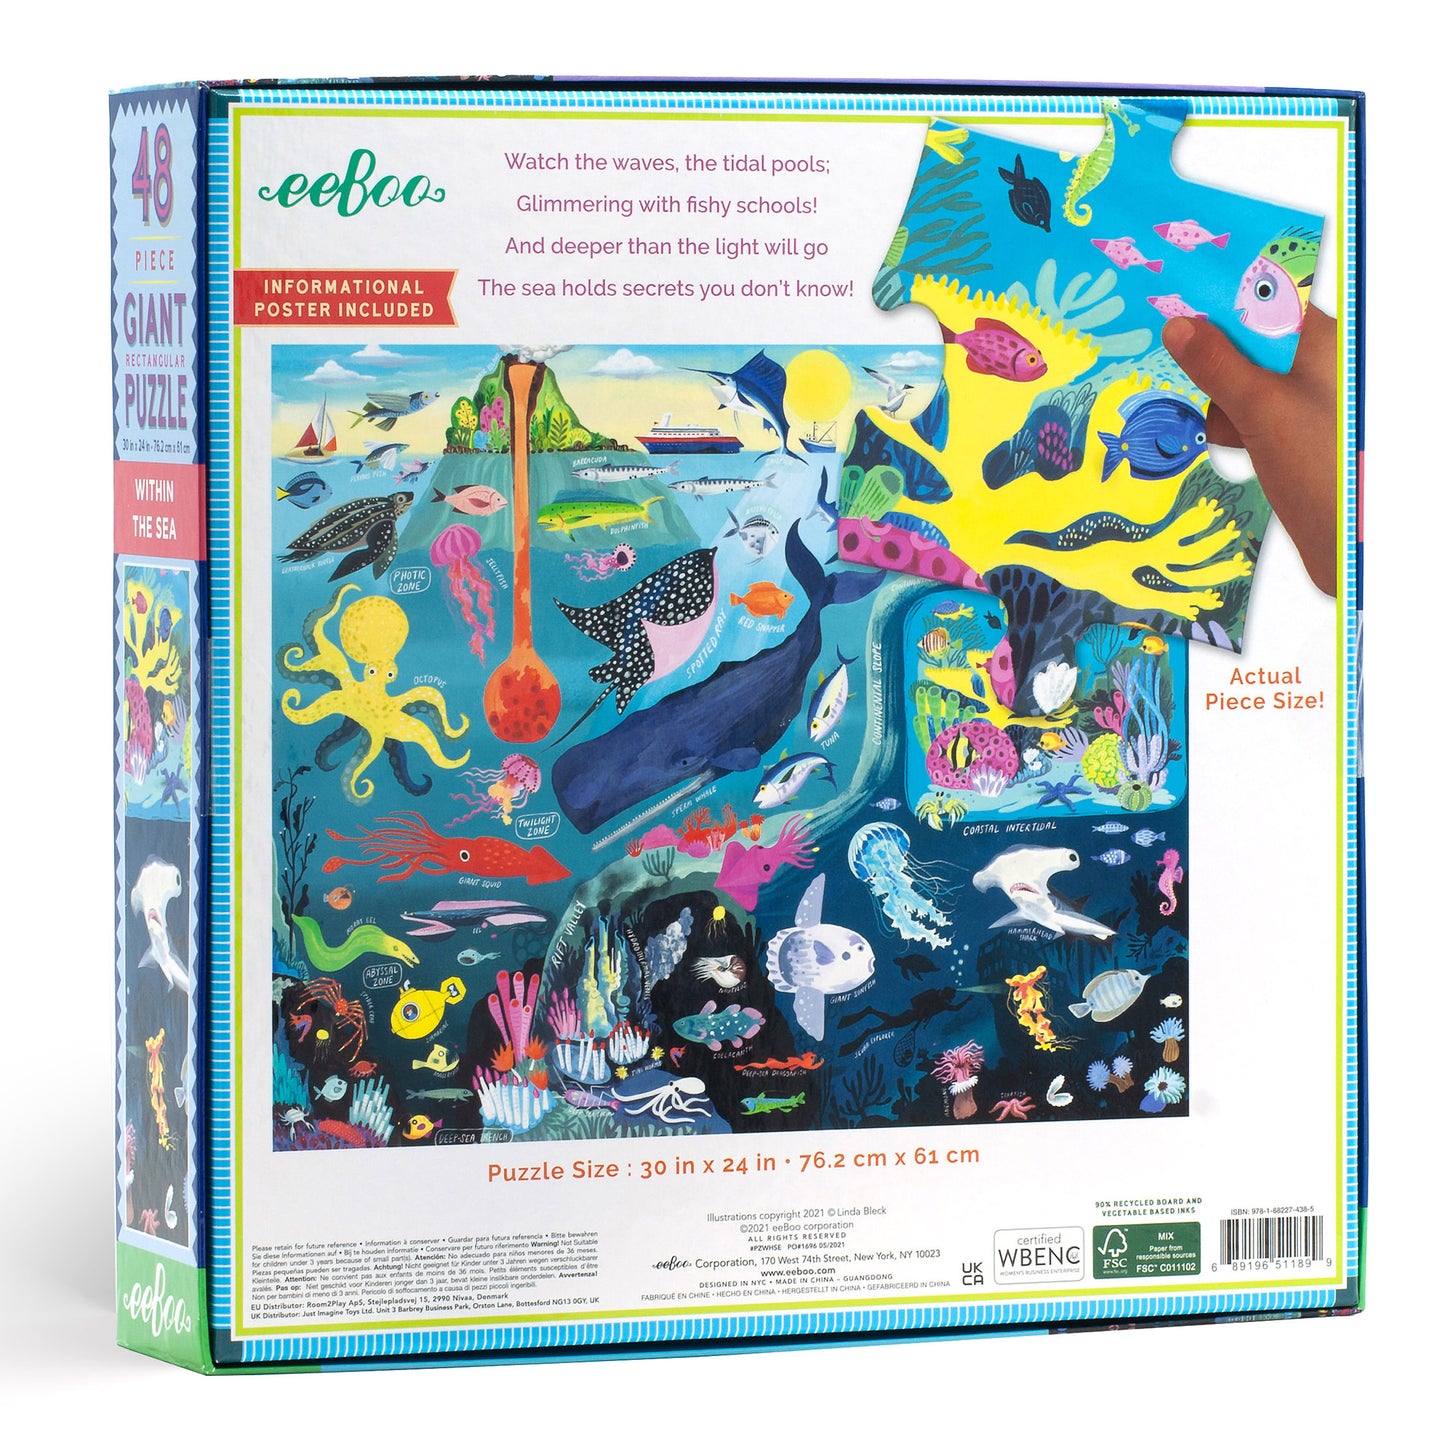 eeBoo Within the Sea 48 Piece Giant Floor Puzzle Gifts for Kids 4+